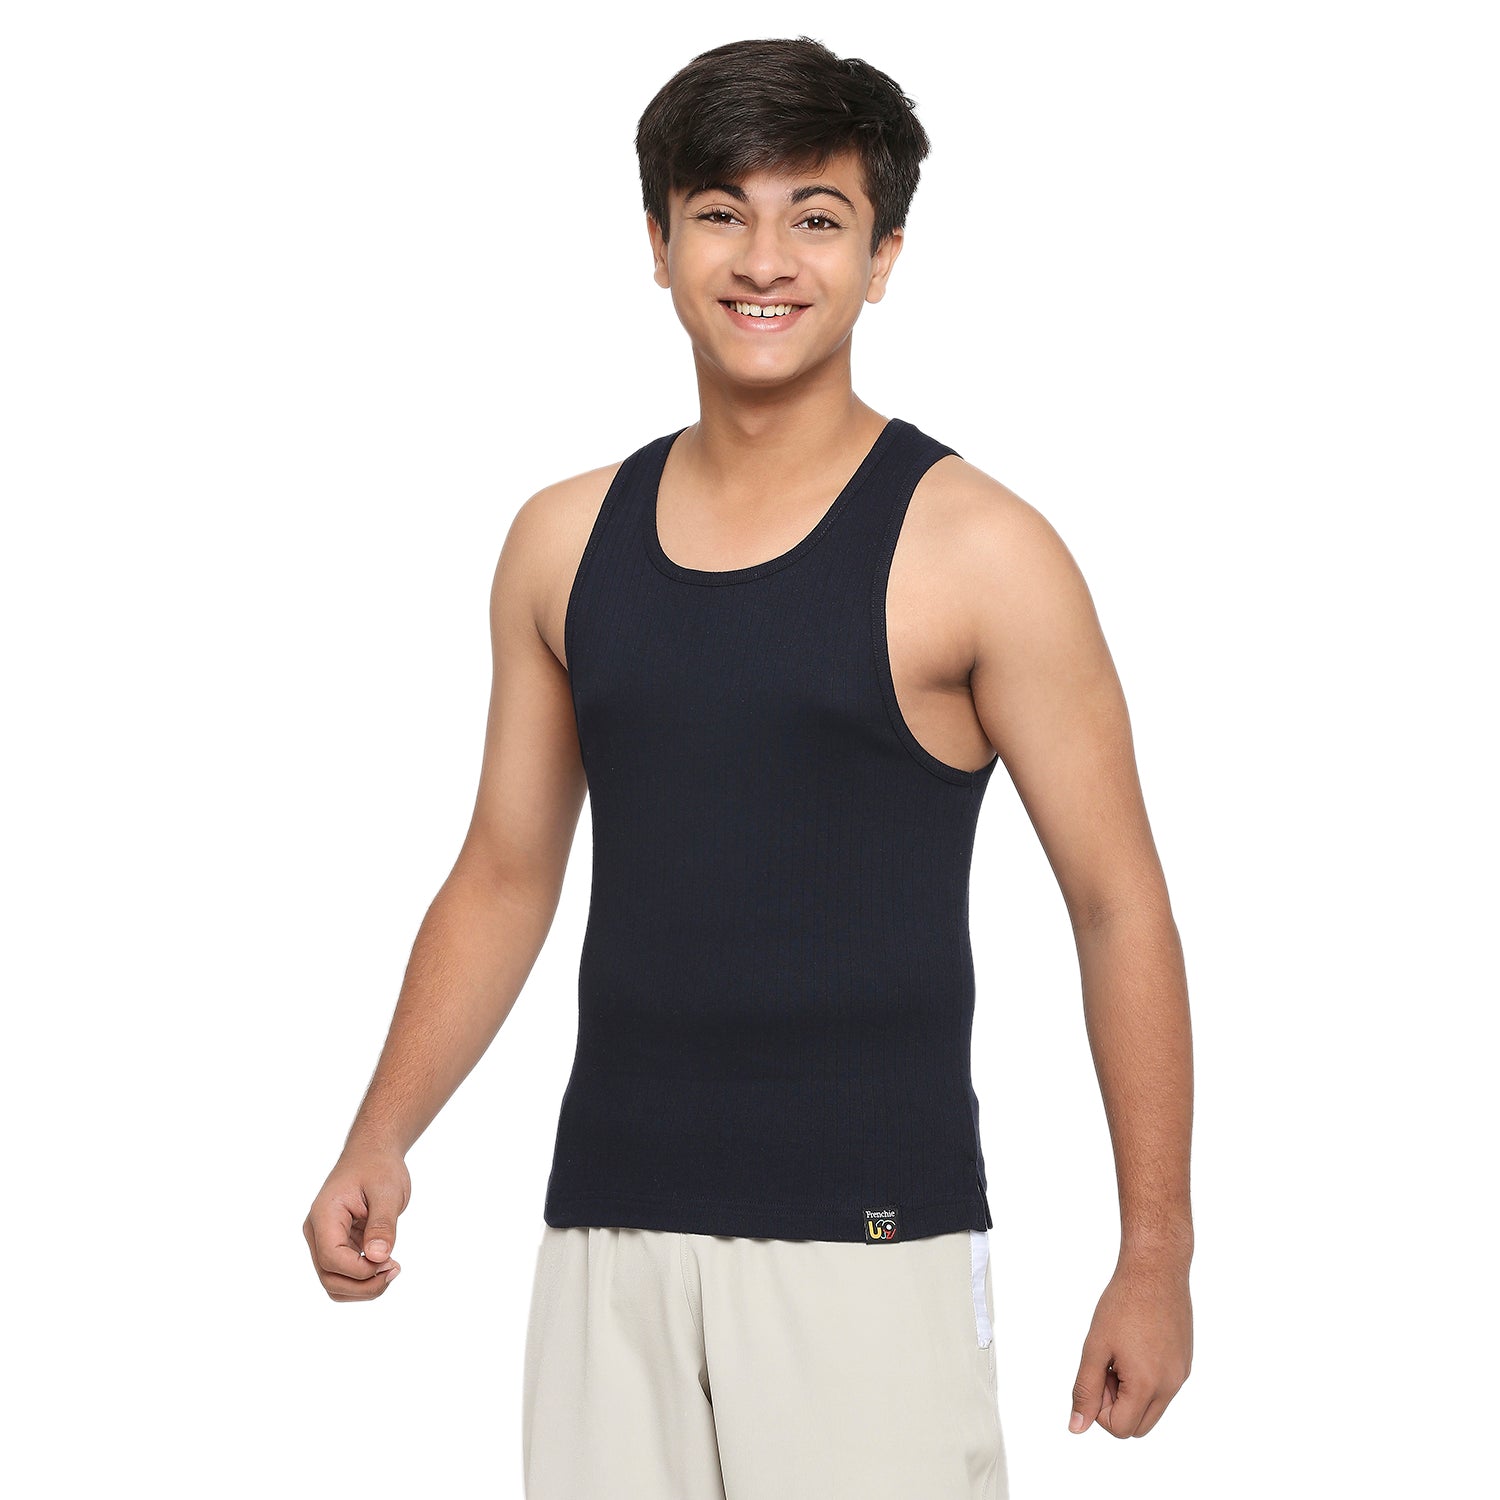 Frenchie U-19 Teens Solid Navy Vest made in 100% Cotton Rib